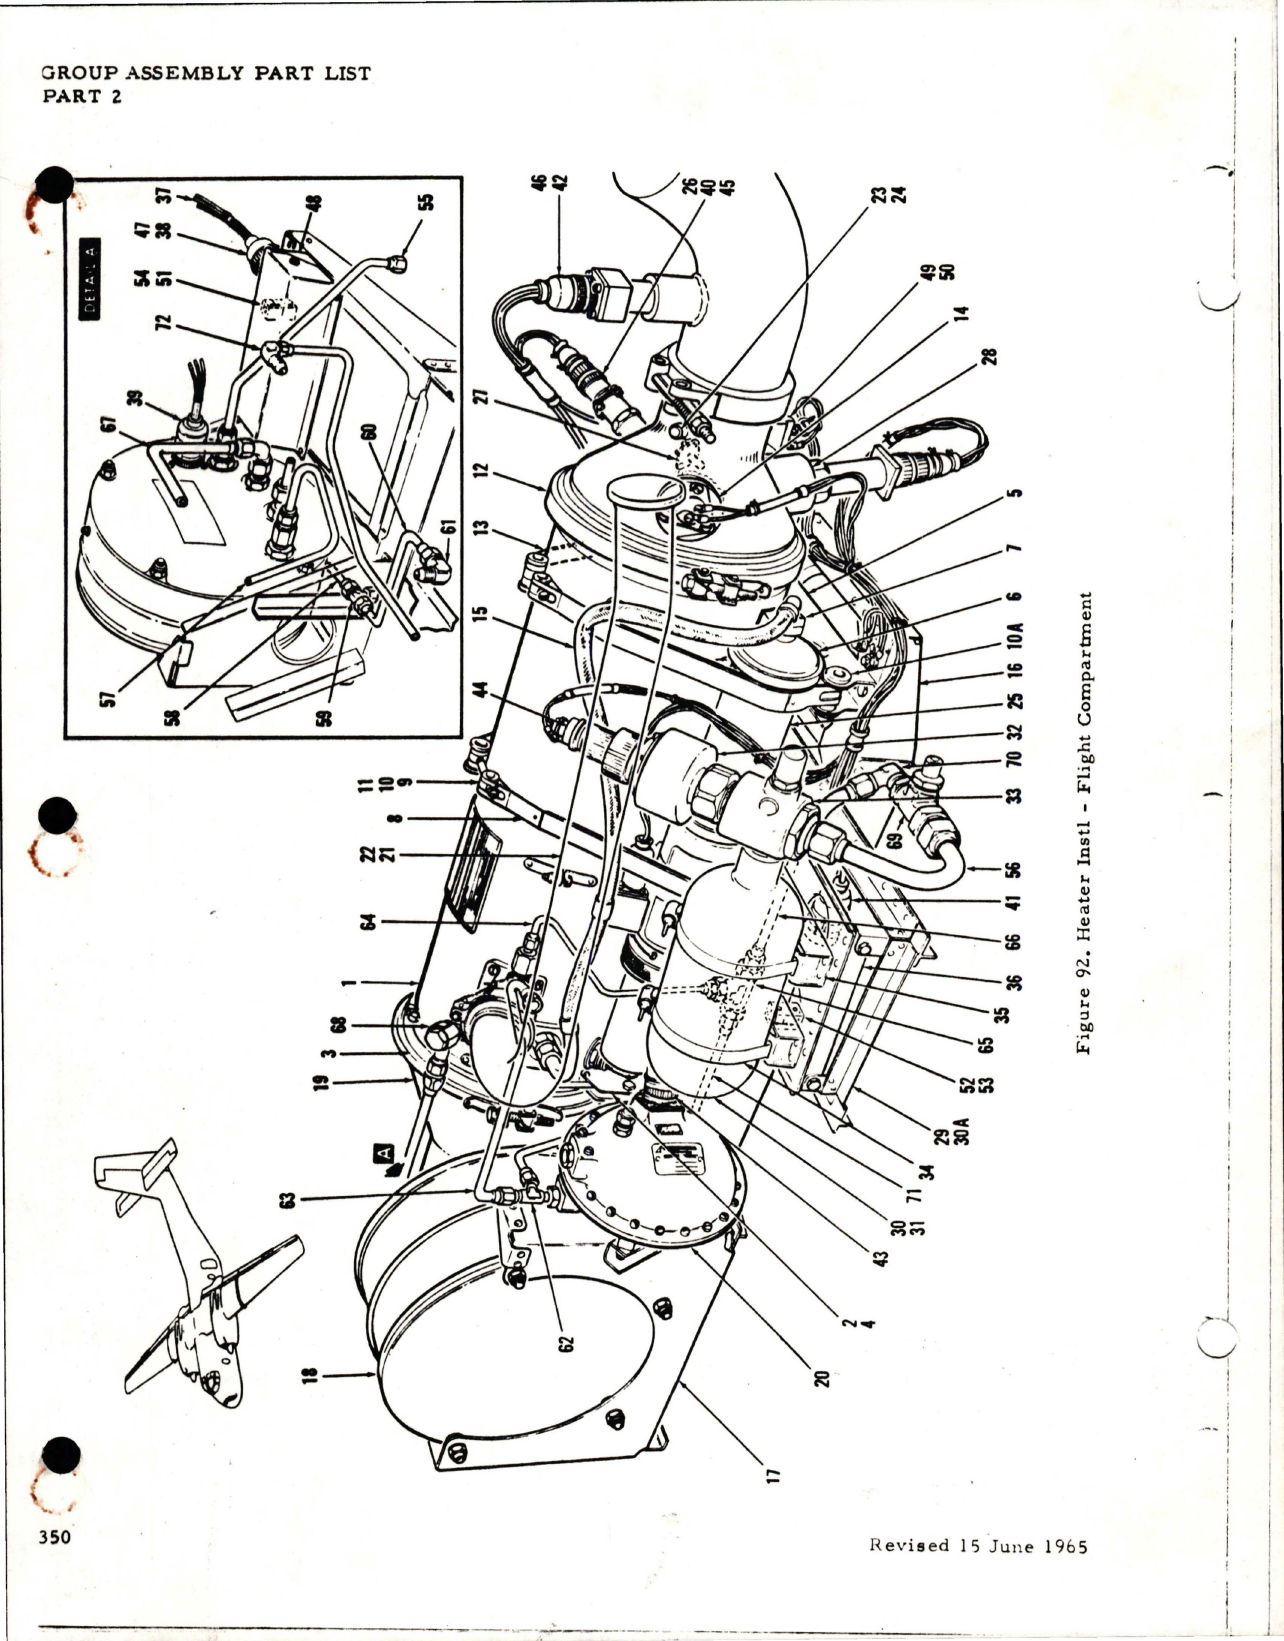 Sample page 1 from AirCorps Library document: Heater Assembly - Parts C4V1027-5 and C4V1027-7